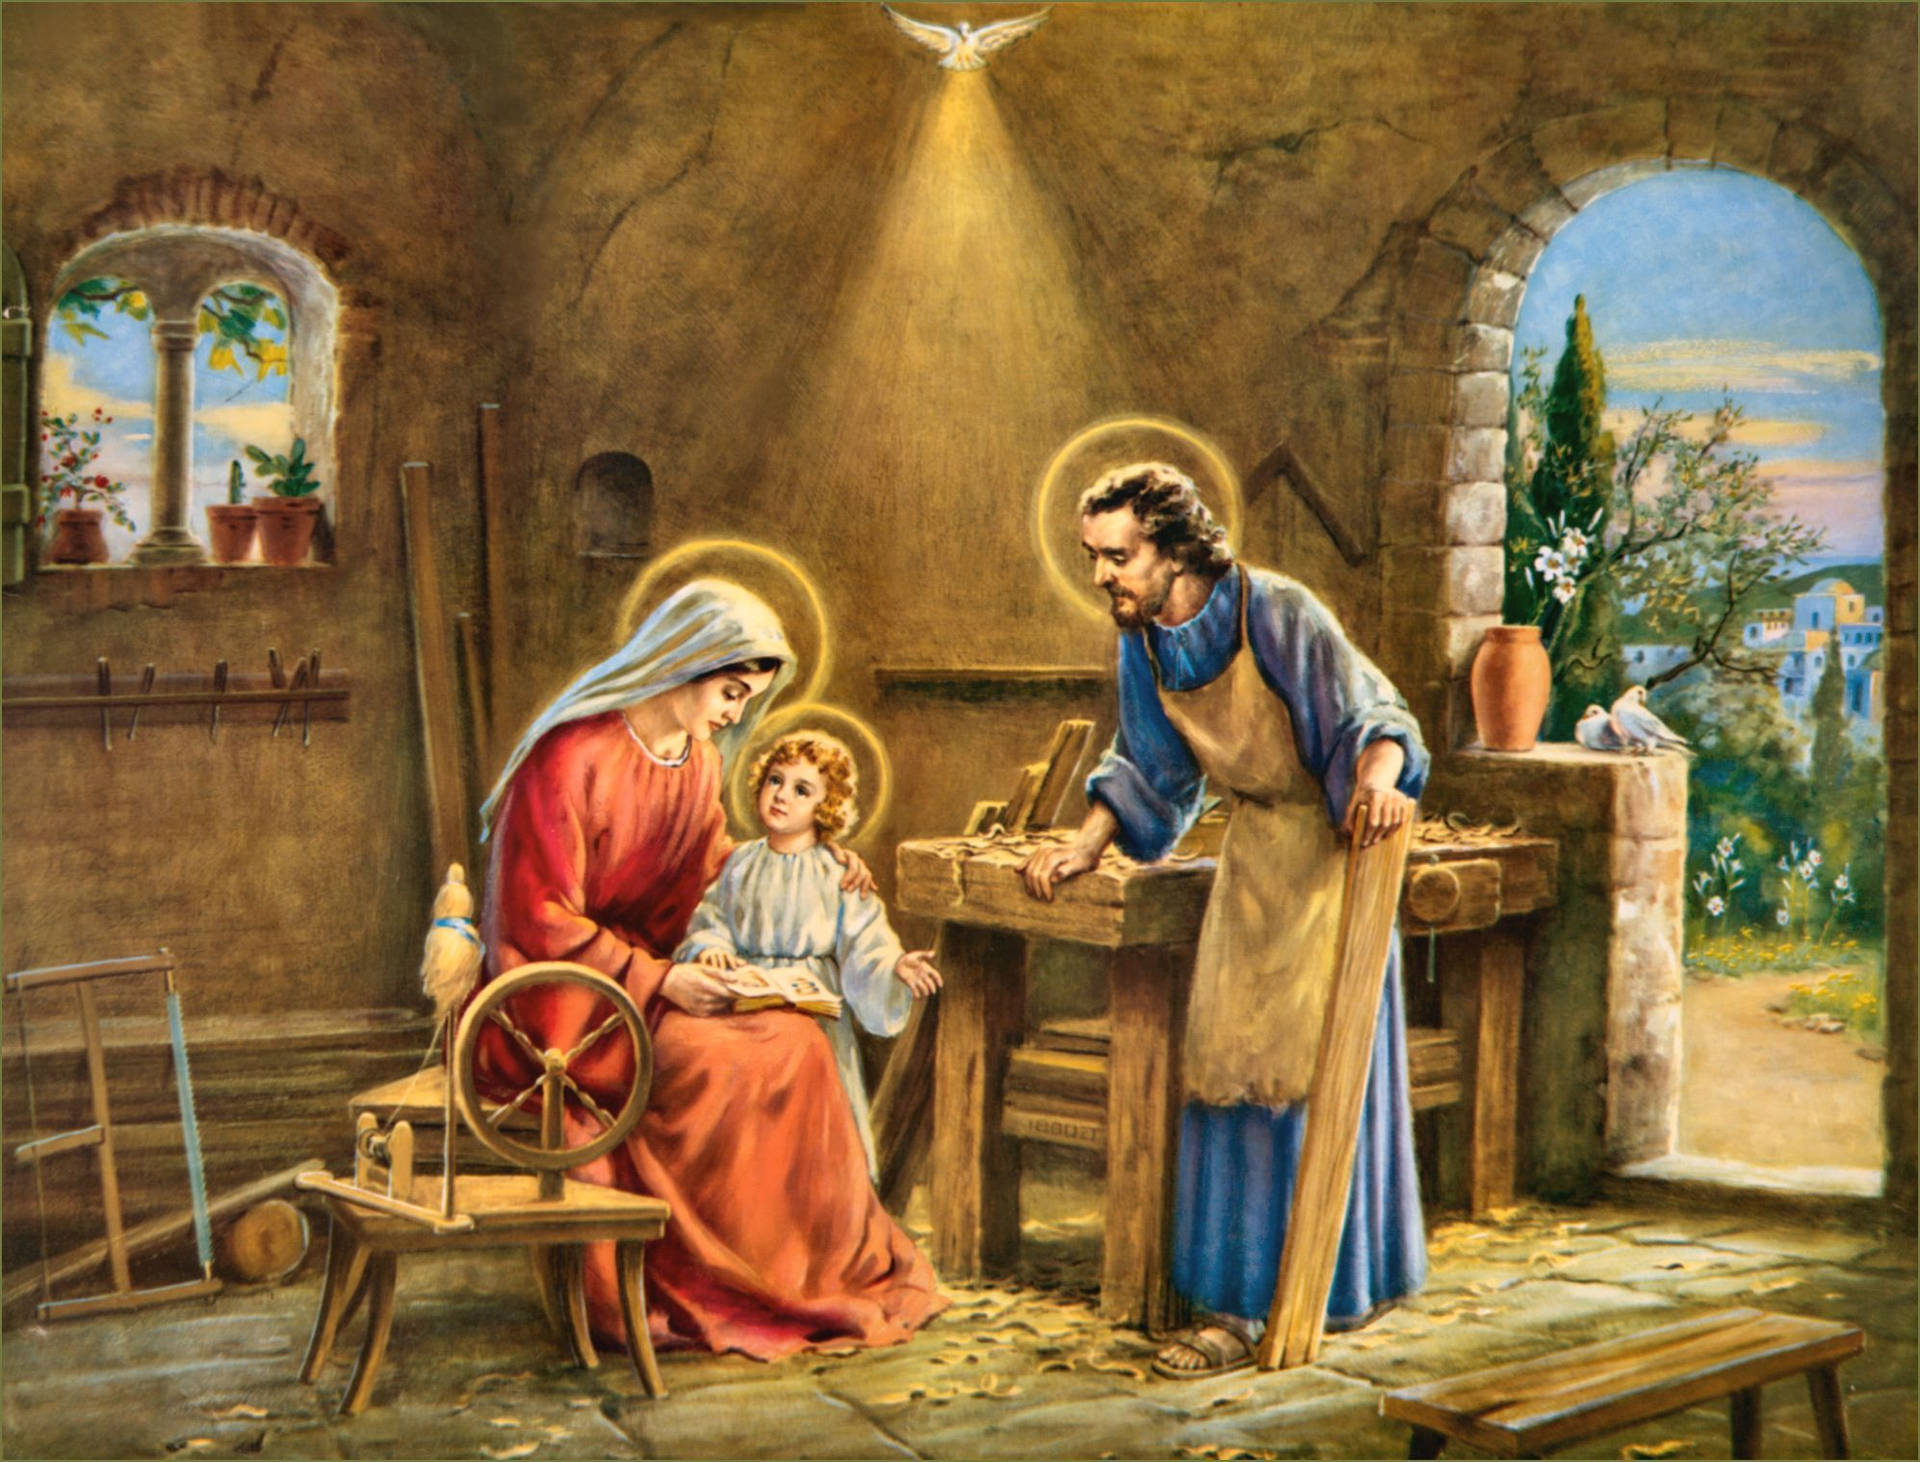 The Holy Family And Joseph's Carpentry